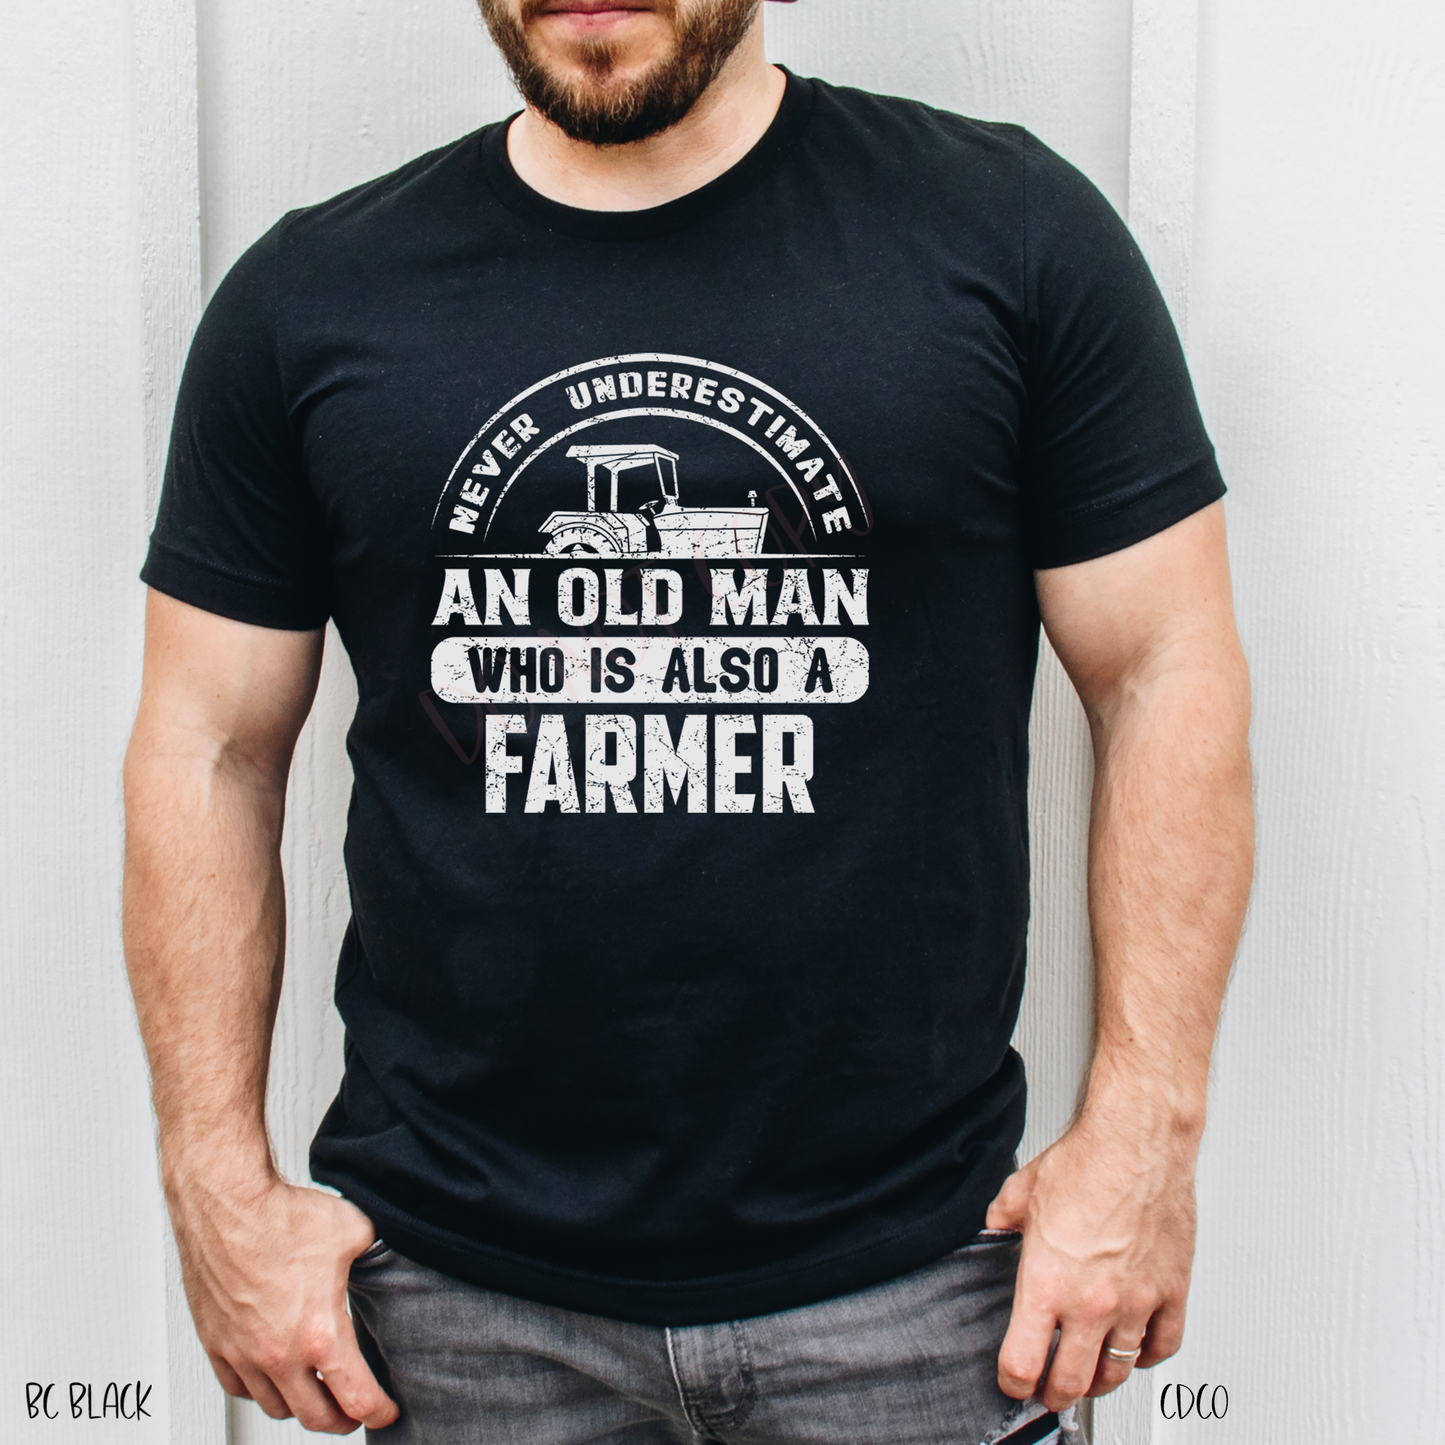 Never Underestimate an Old Man Who is Also a Farmer (325°)